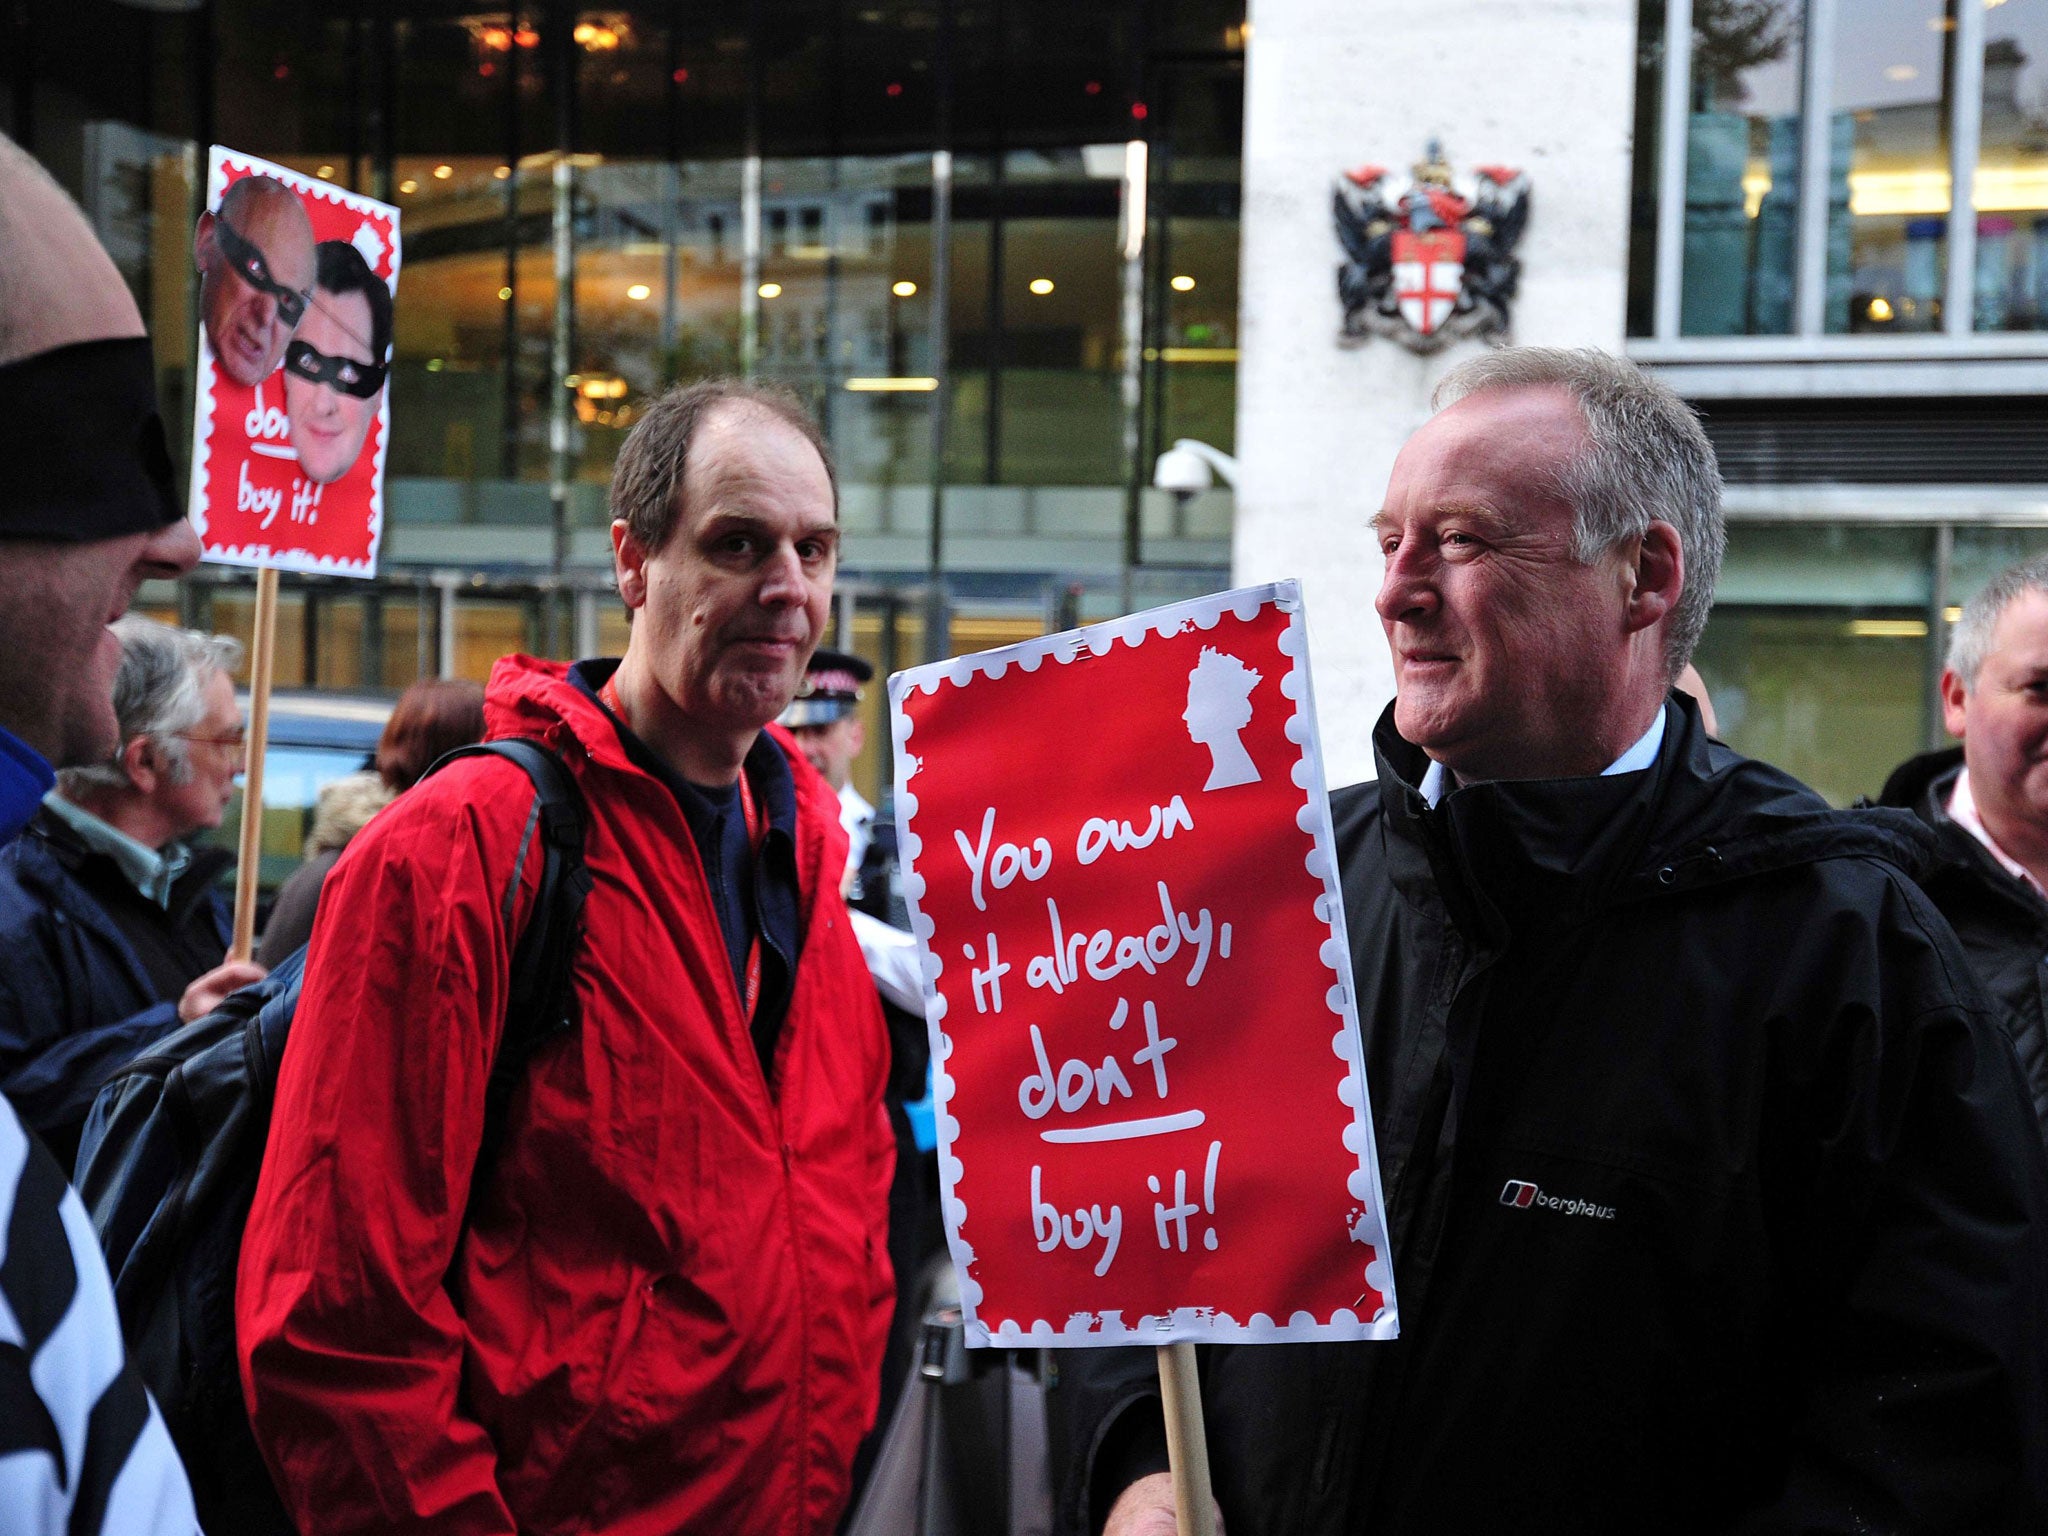 Protesters take part in a demonstration by the Communication Workers Union against Royal Mail privatisation outside the London Stock Exchange